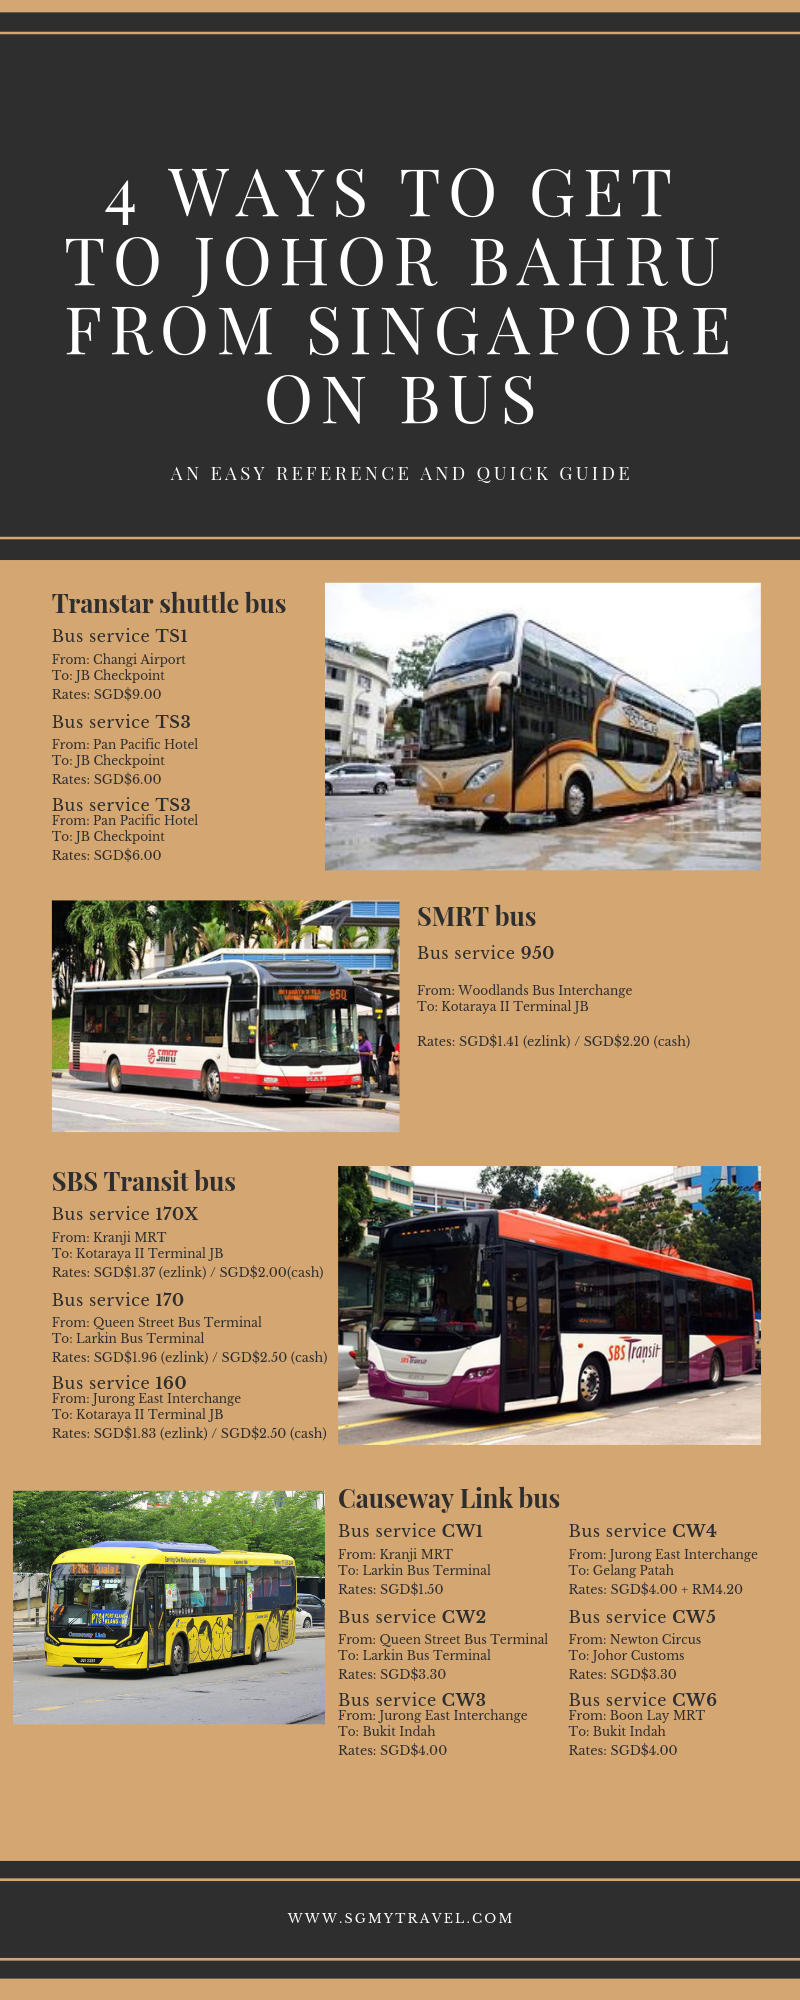 4 WAYS TO GET TO JOHOR BAHRU FROM SINGAPORE ON BUS